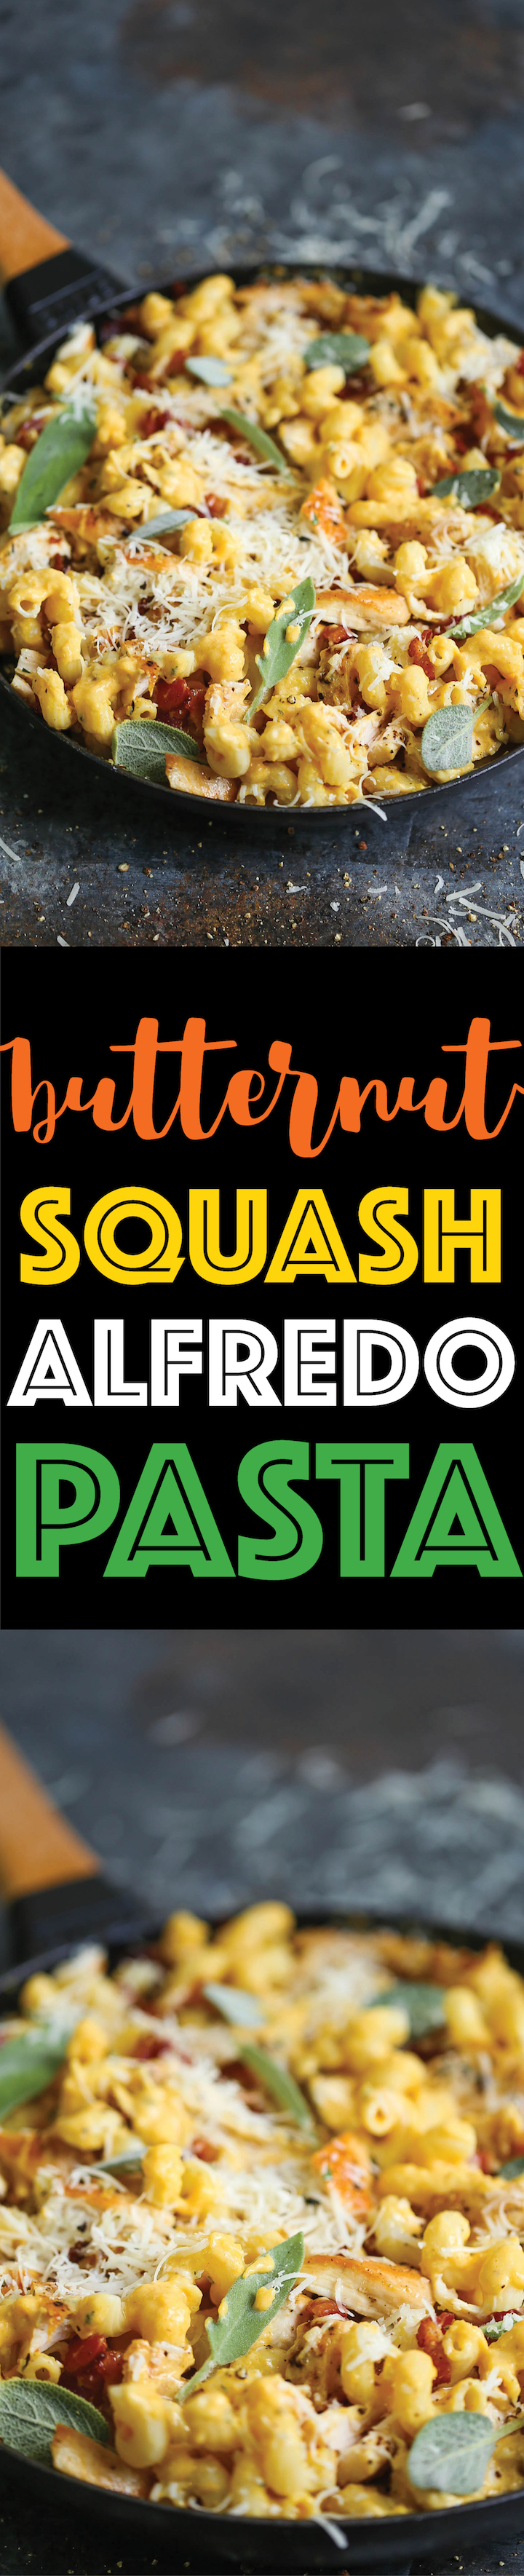 Butternut Squash Alfredo Pasta - Is there anything more cozy in the middle of Fall? And this alfredo sauce is made completely FROM SCRATCH in less than 30!